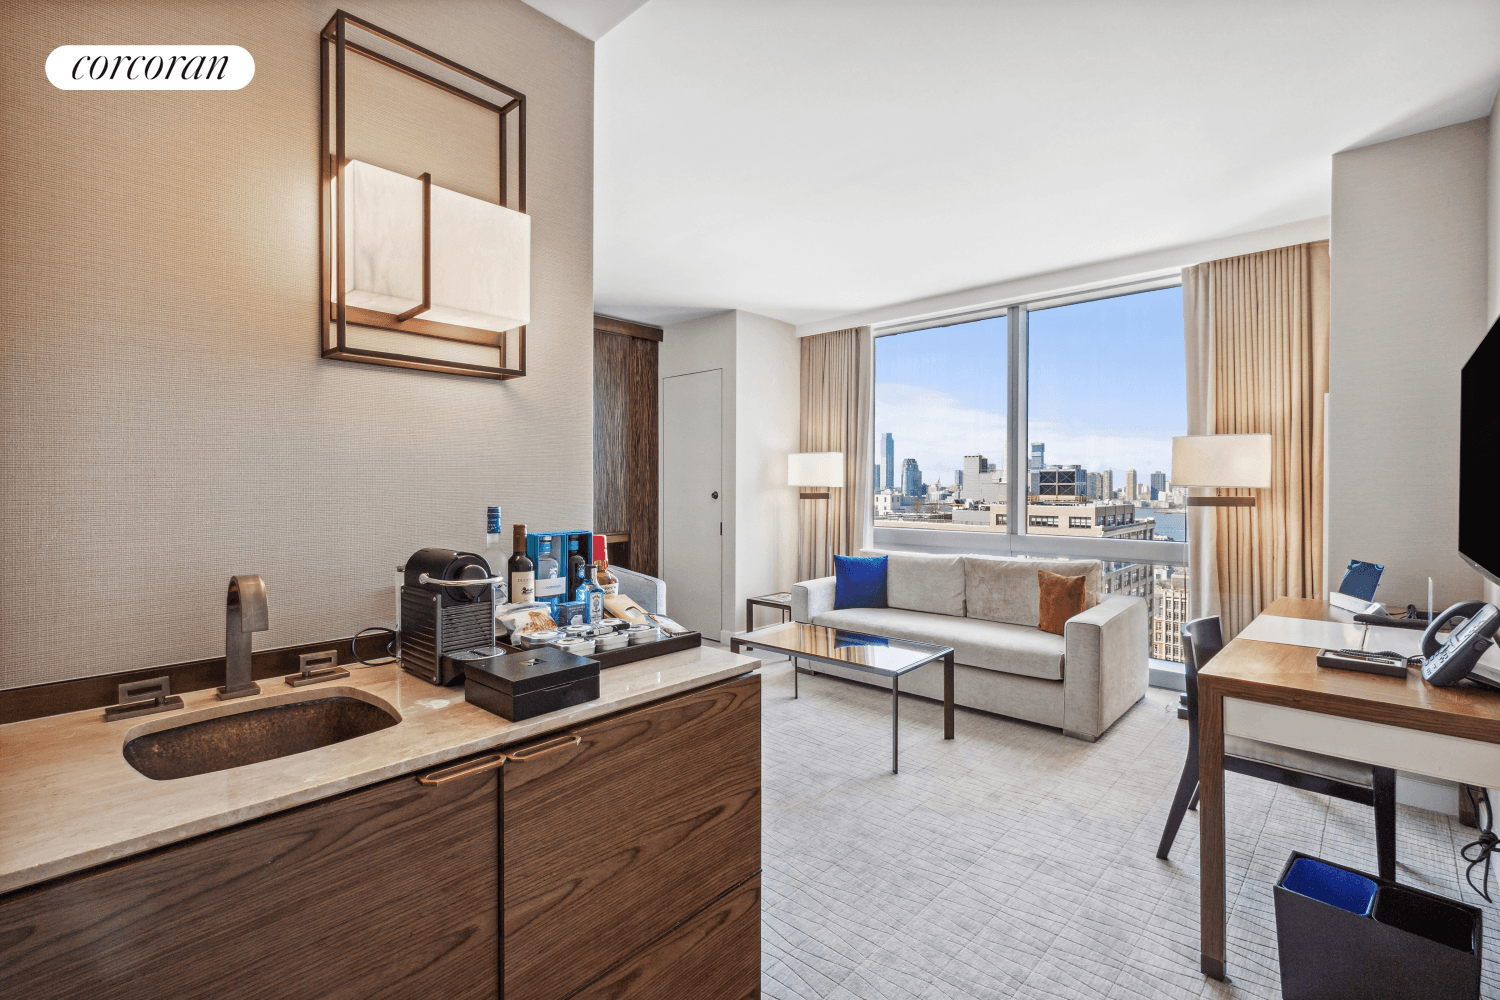 Exceptional Pied a Terre or Investment Opportunity in SoHo World Class Amenities Named Forbes Hotel with Best Views in NYCResidence 2205 at the luxurious Dominick Hotel is a fully furnished ...